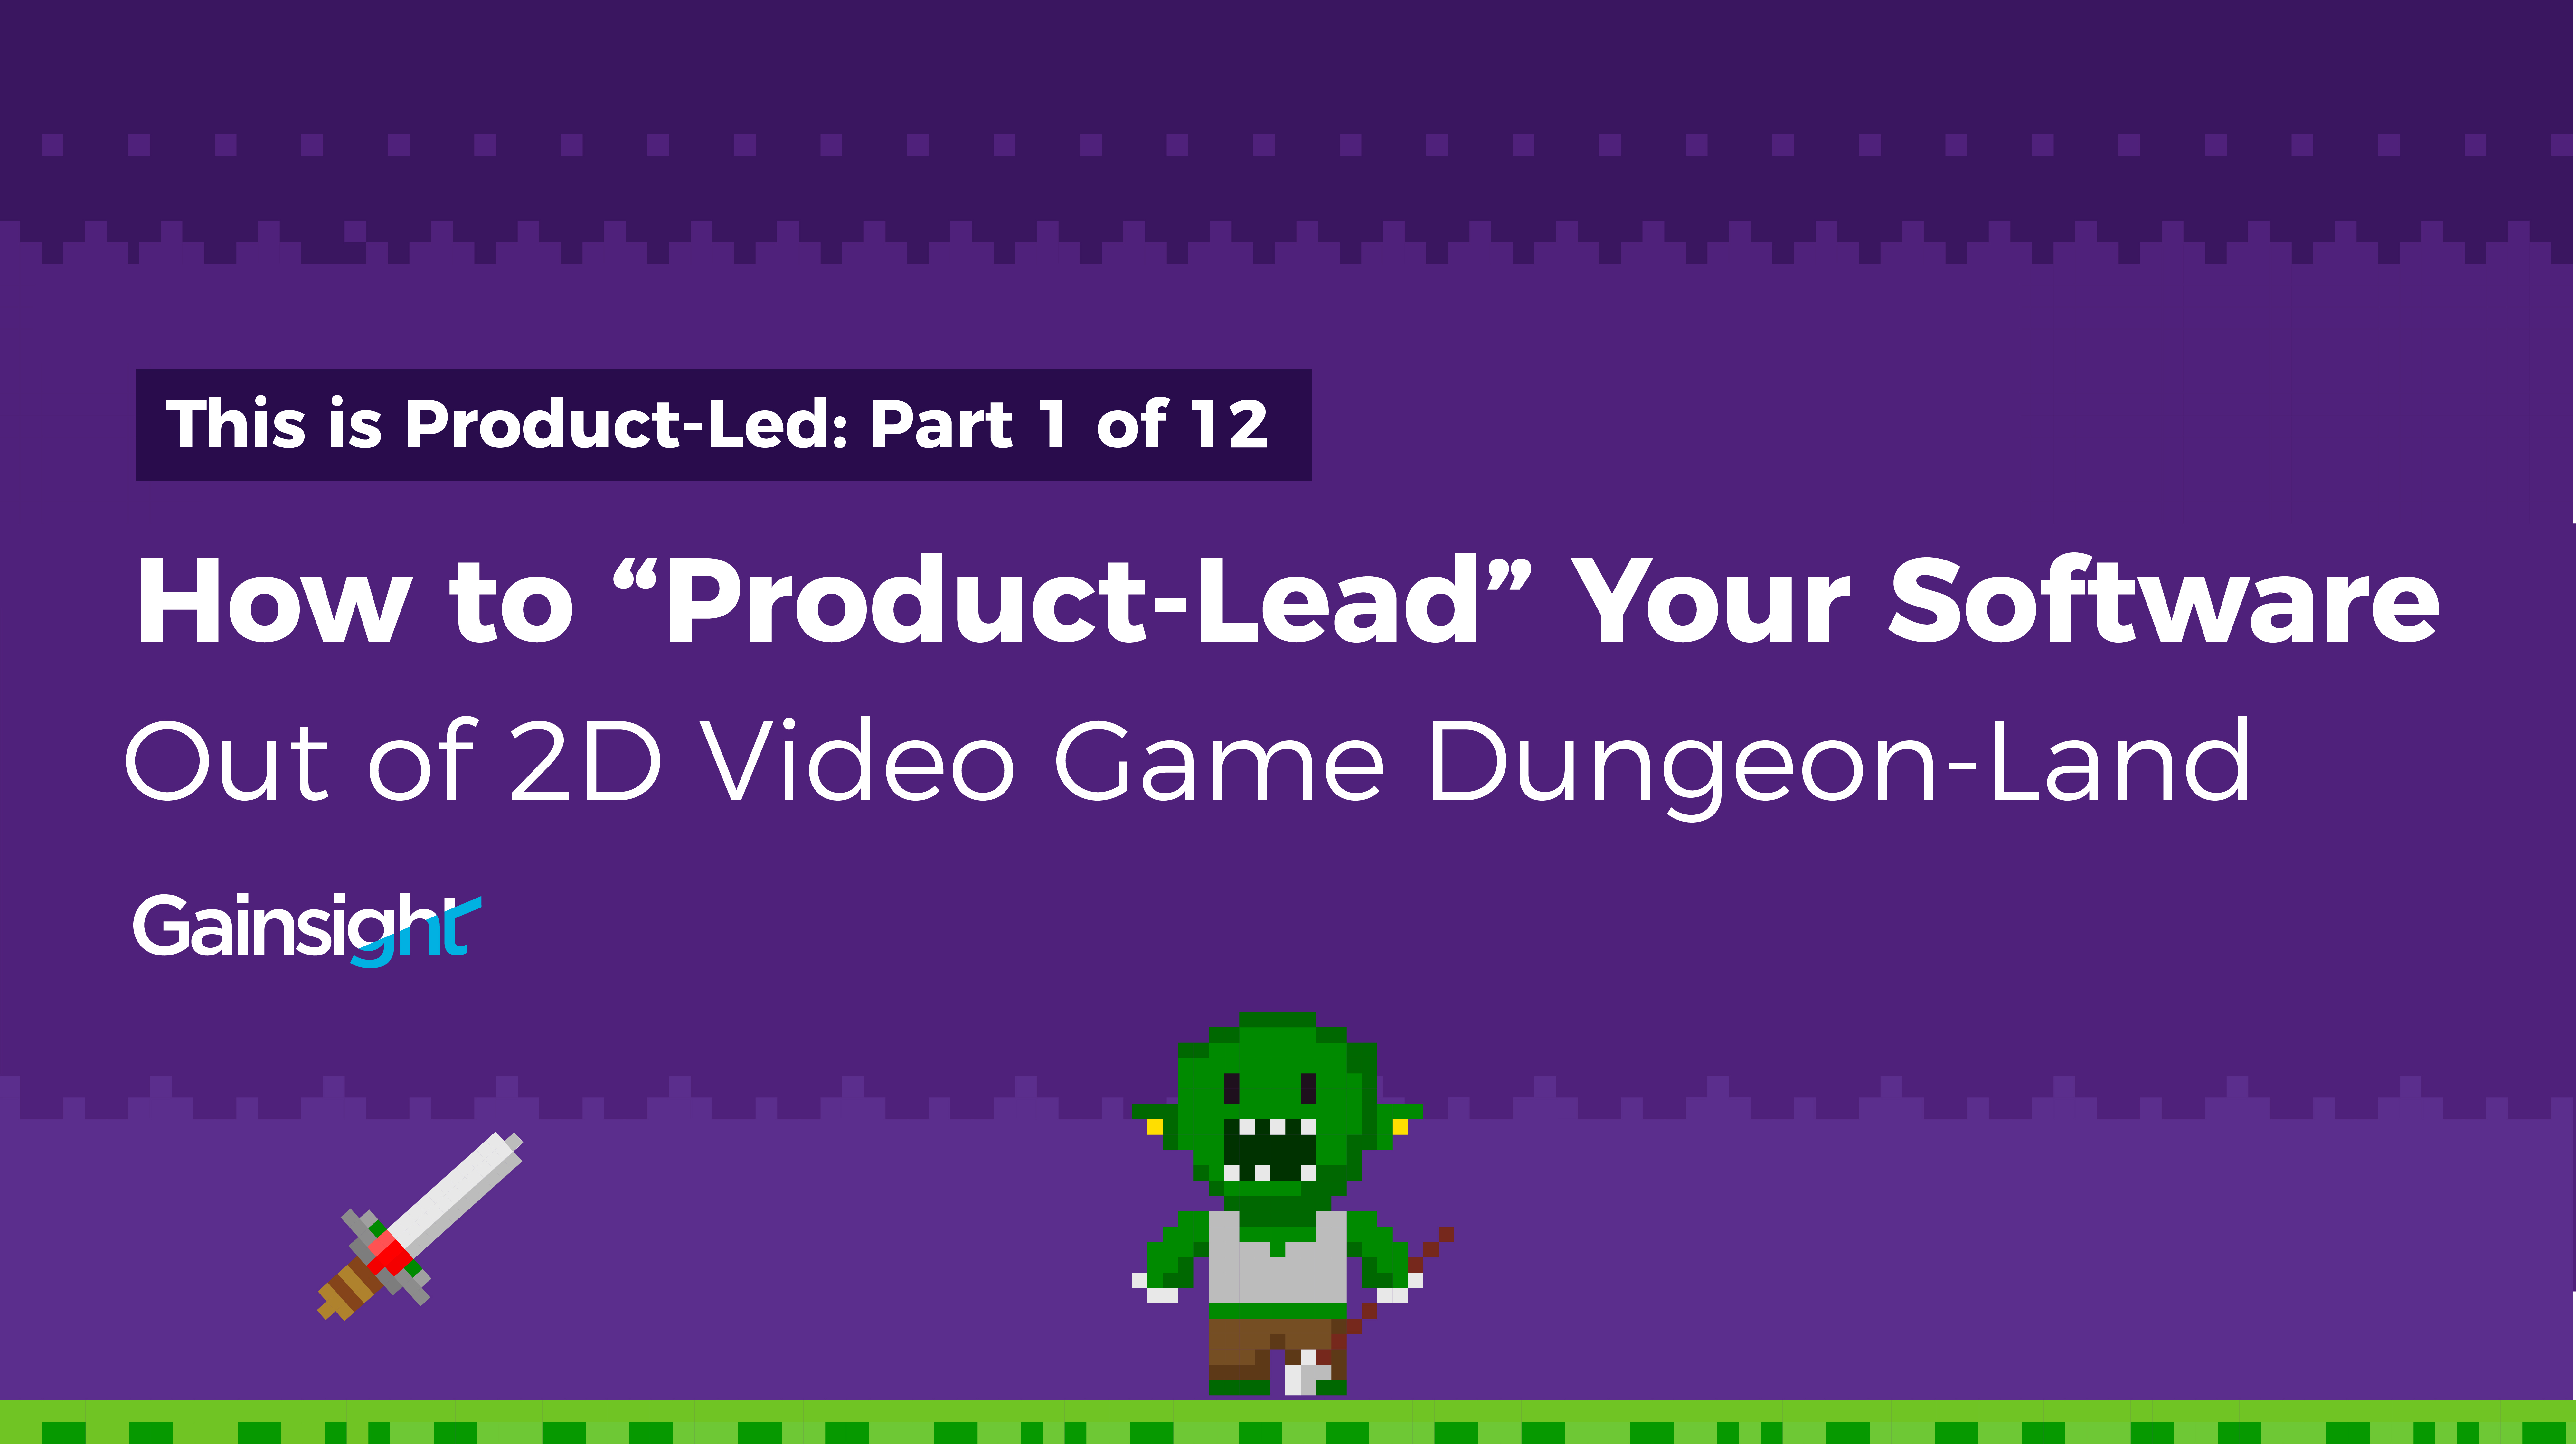 How to “Product-Lead” Your Software Out of 2D Video Game Dungeon-Land Image